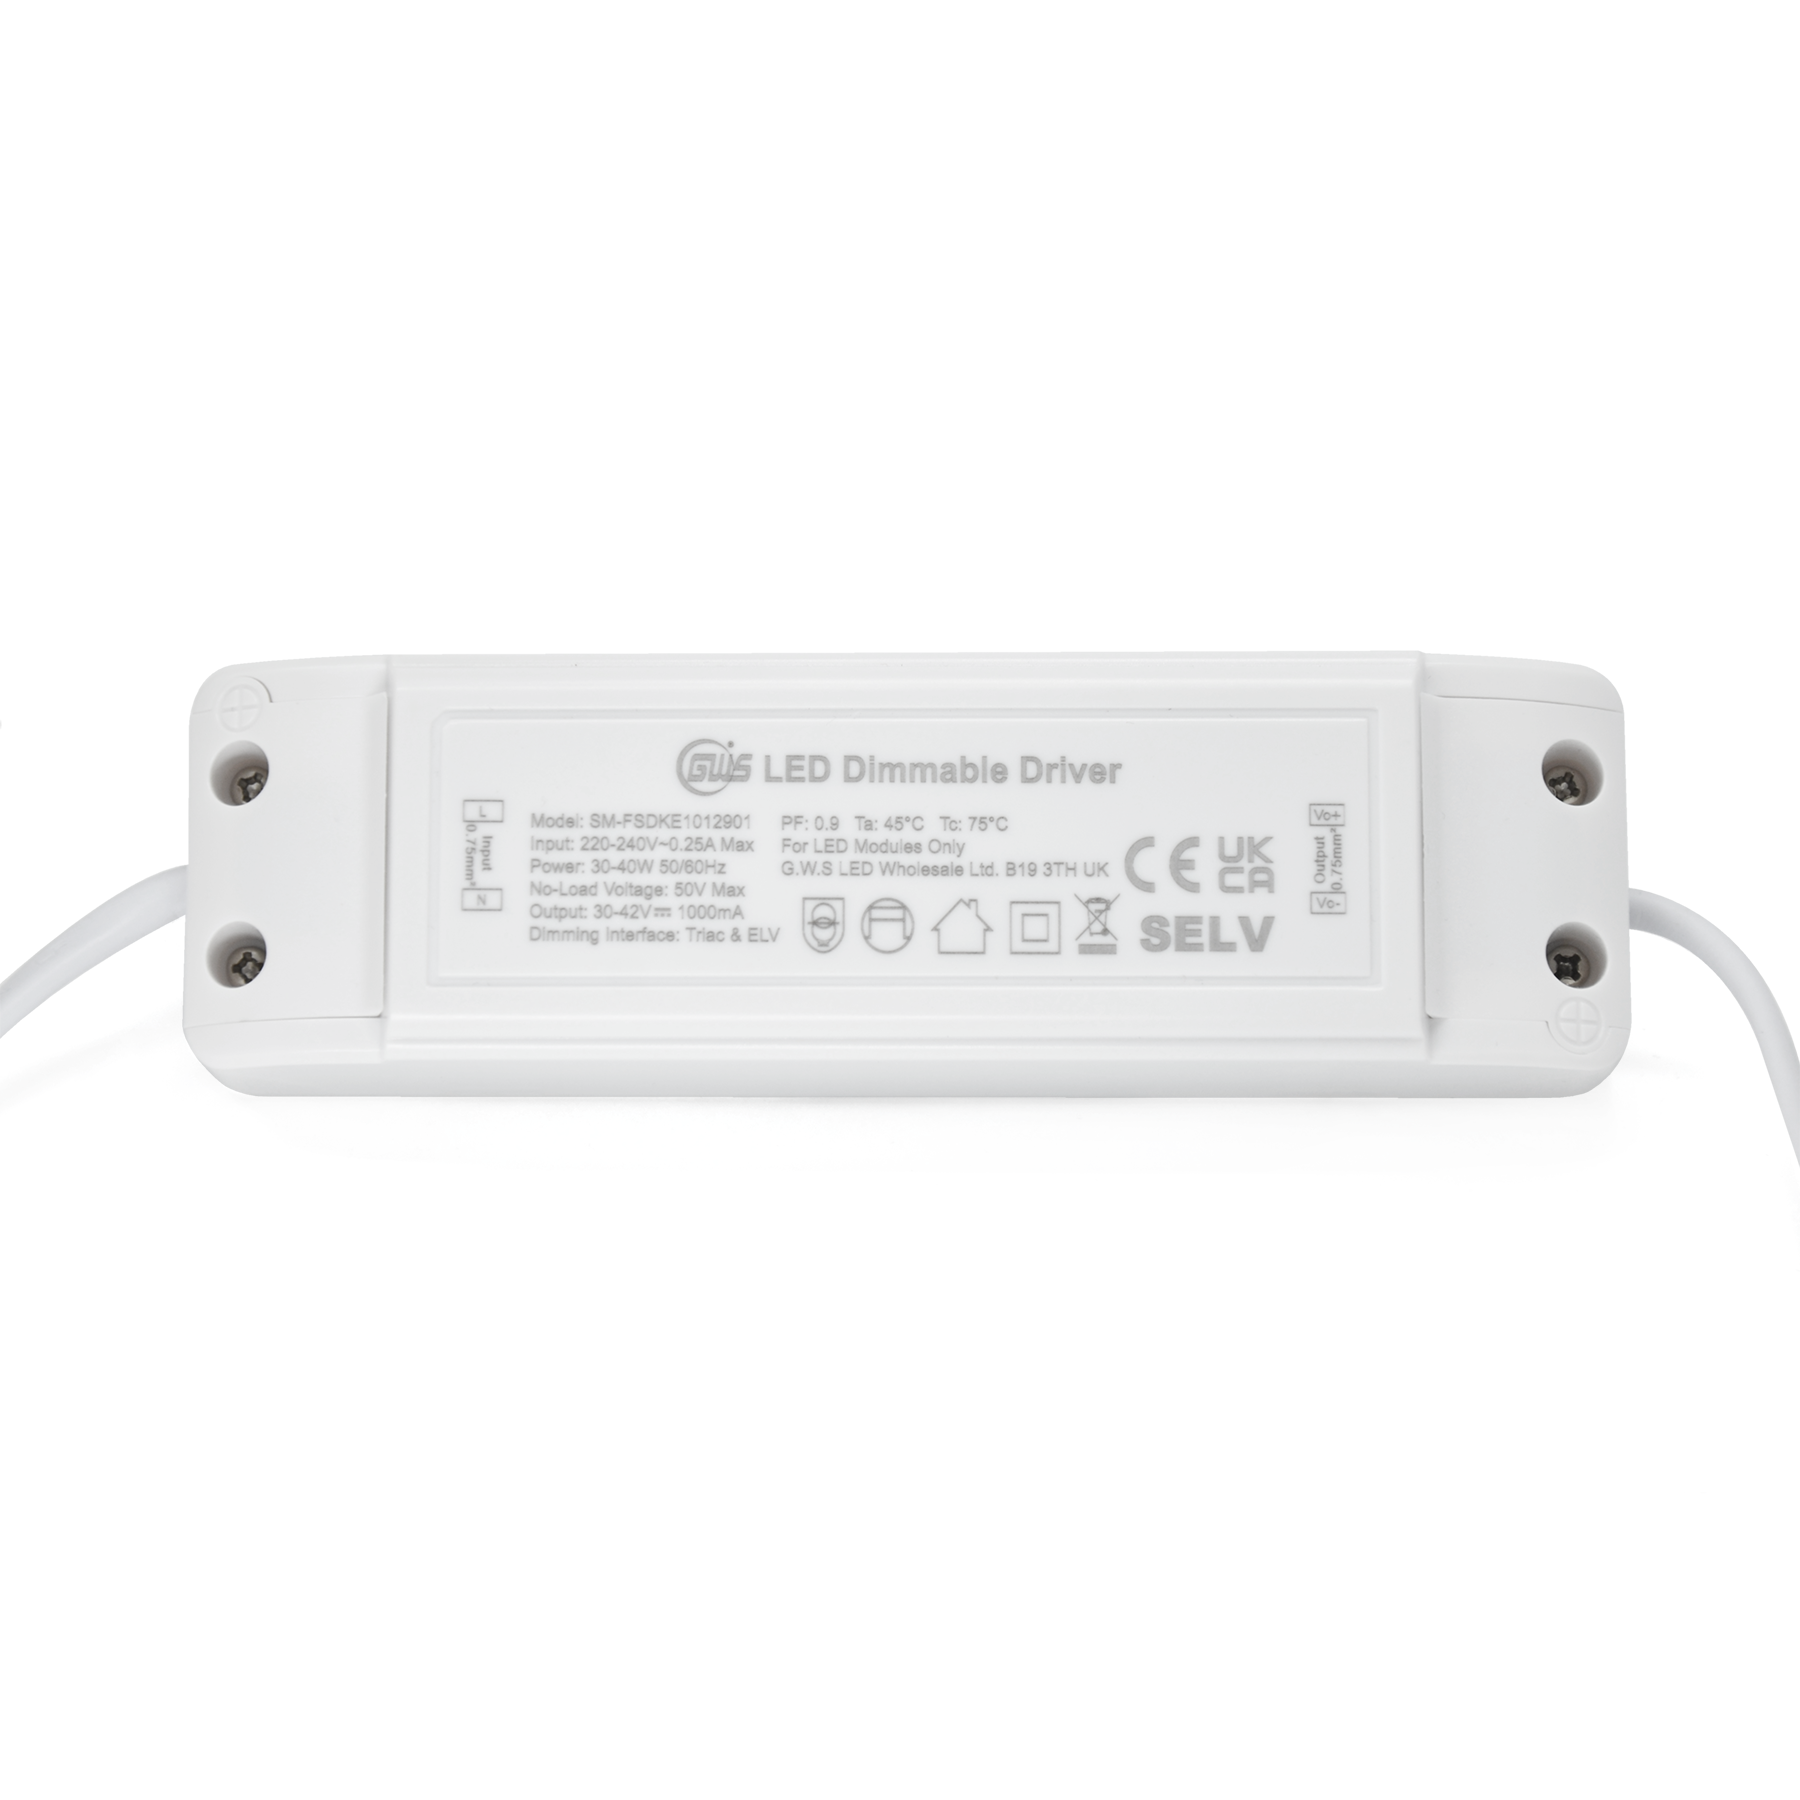 G.W.S LED Wholesale LED Drivers/LED Power Supplies Triac Constant Current LED Dimmable Driver 3-40W